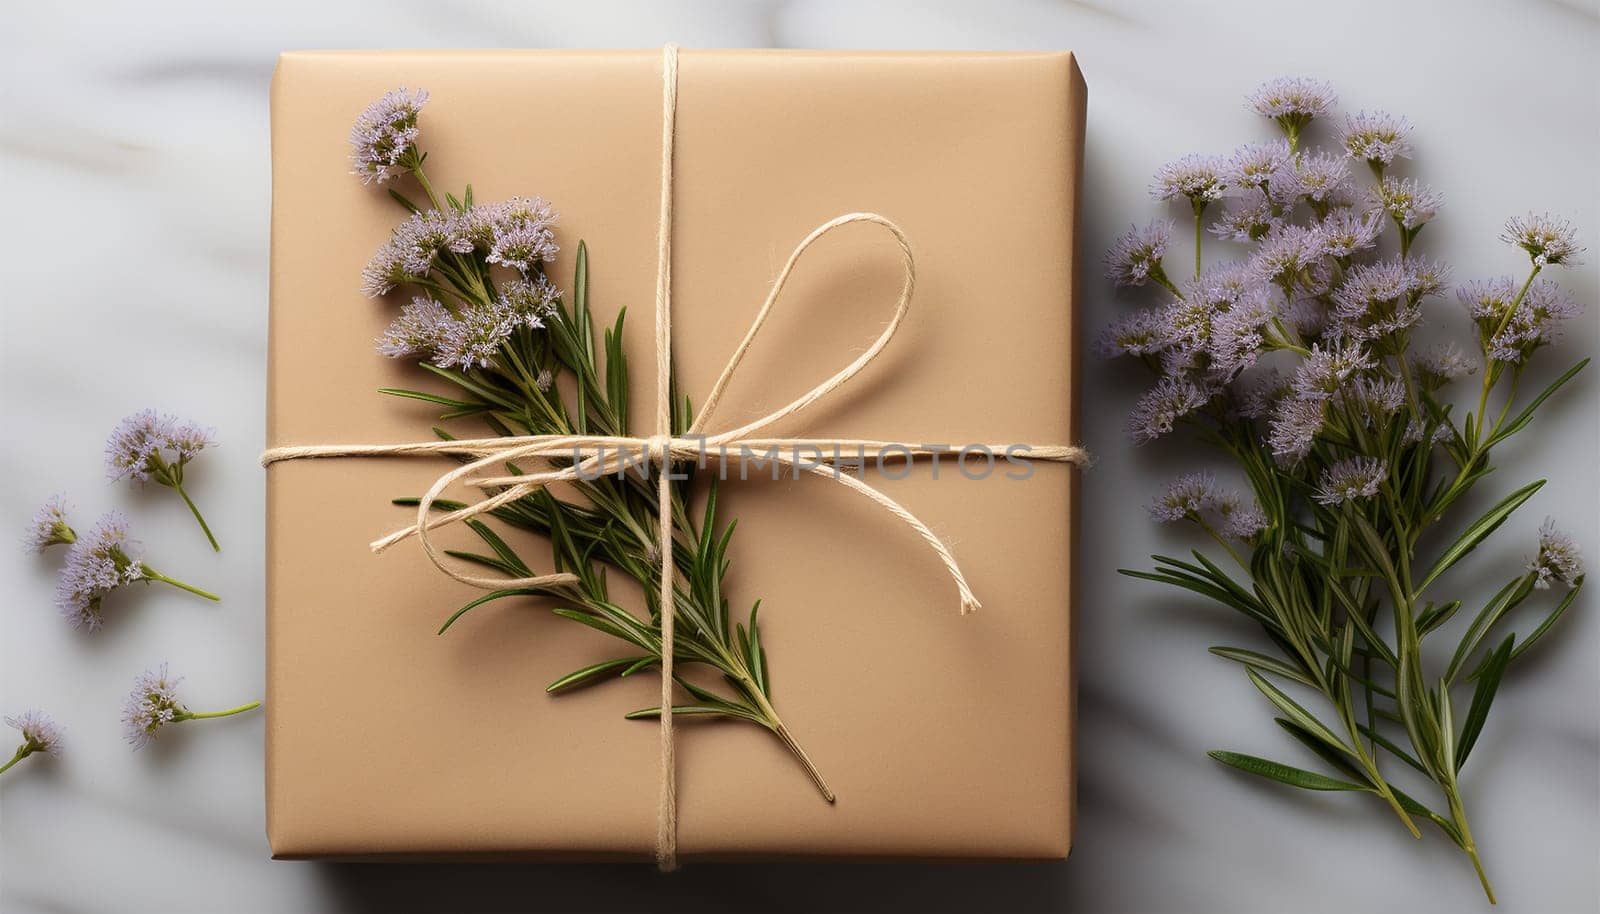 Handmade gift in craft paper box close up with lavender,romantic flowers. Shipping eco package with flowers. MINIMALISTIC Delivery pack. Gift idea, eco-lifestyle. Natural concept. Sustainable gift package. Romantic design Valentine's Day,Mother's Day concept Natural